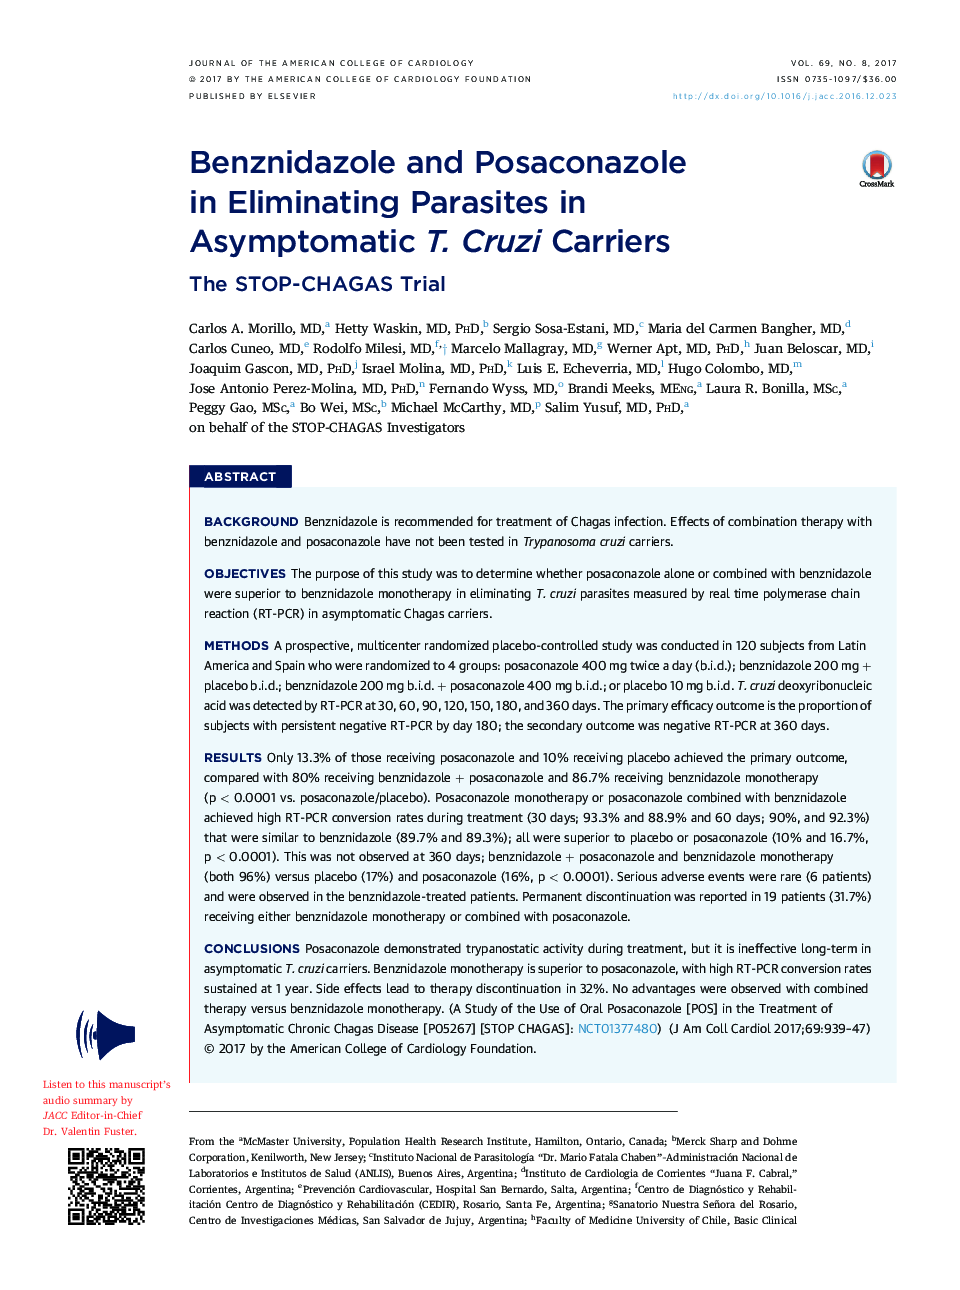 Benznidazole and Posaconazole inÂ Eliminating Parasites in AsymptomaticÂ T.Â Cruzi Carriers